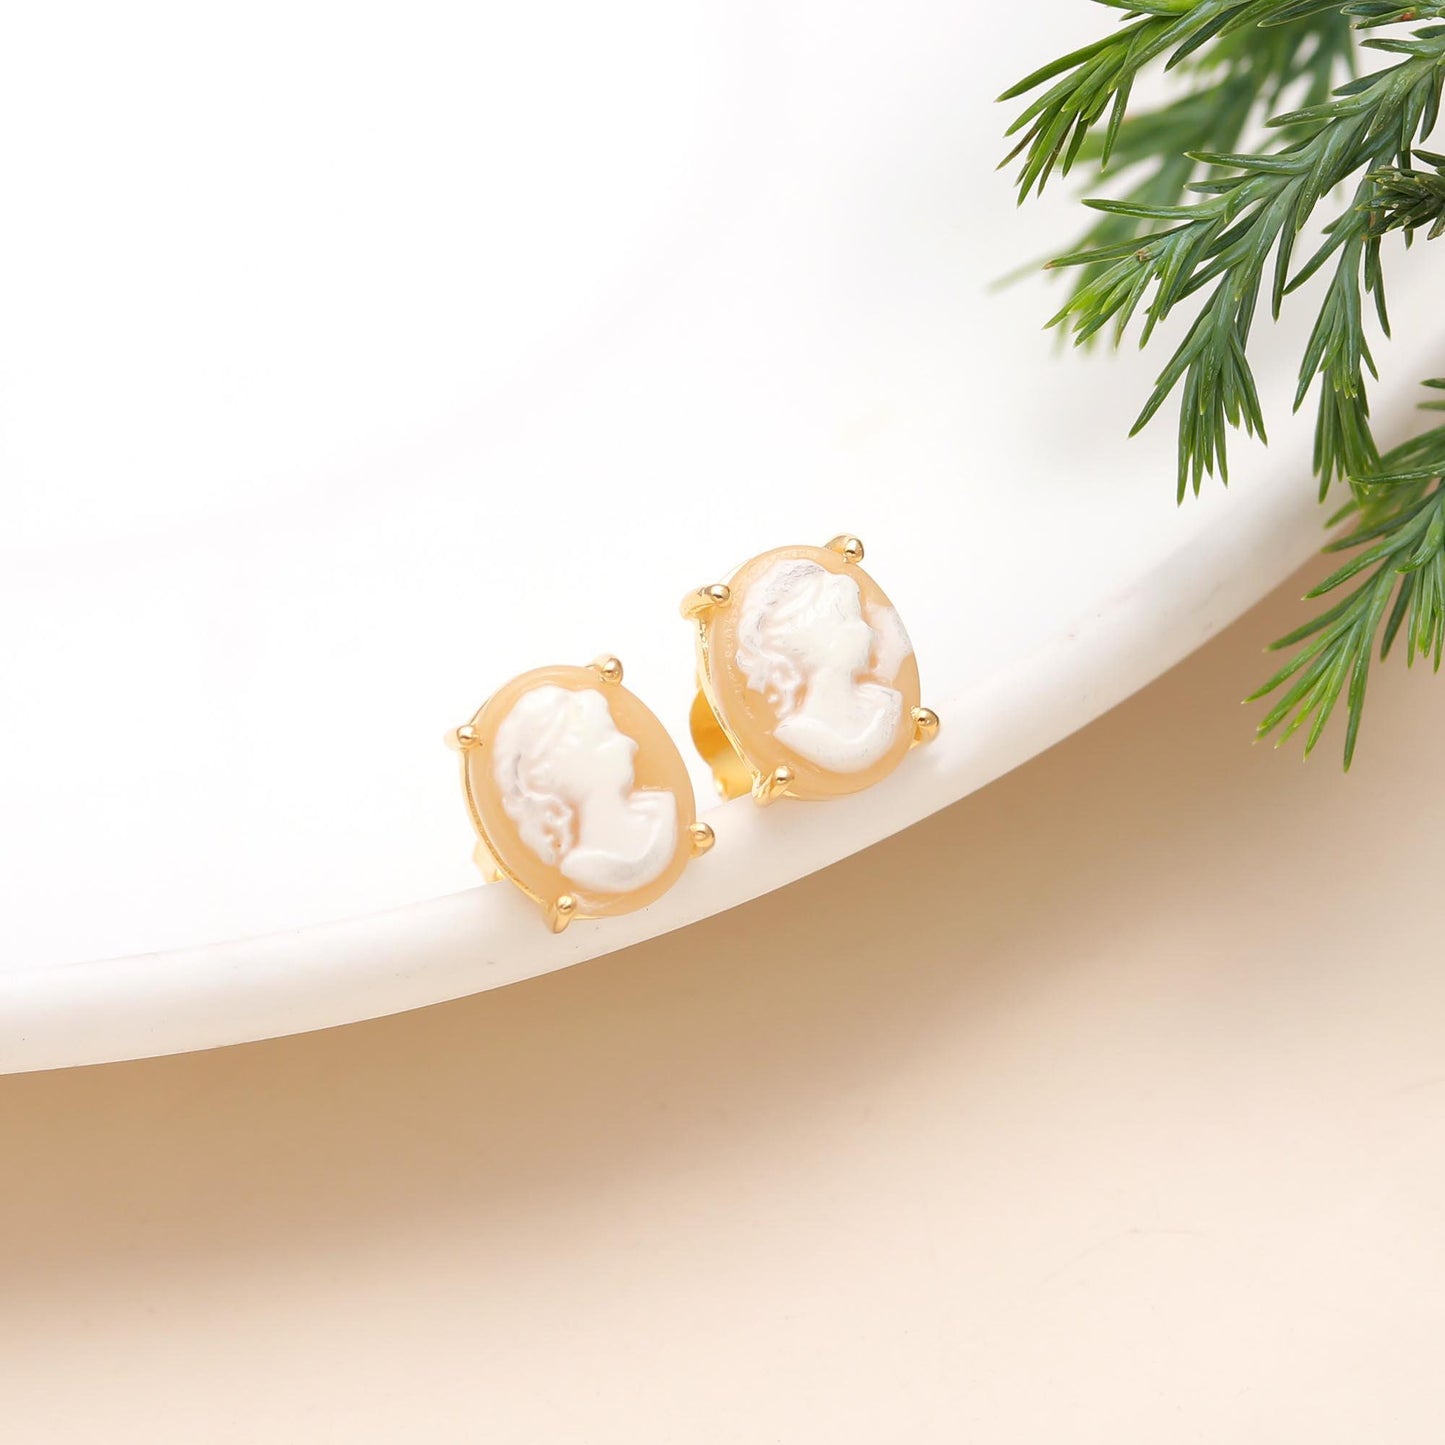 Solid 925 Sterling Silver Cameo Stud Earring with Pushback Gold Plating, Gift Birthday, Anniversary, Mothers Day, Christmas, Women, Girl